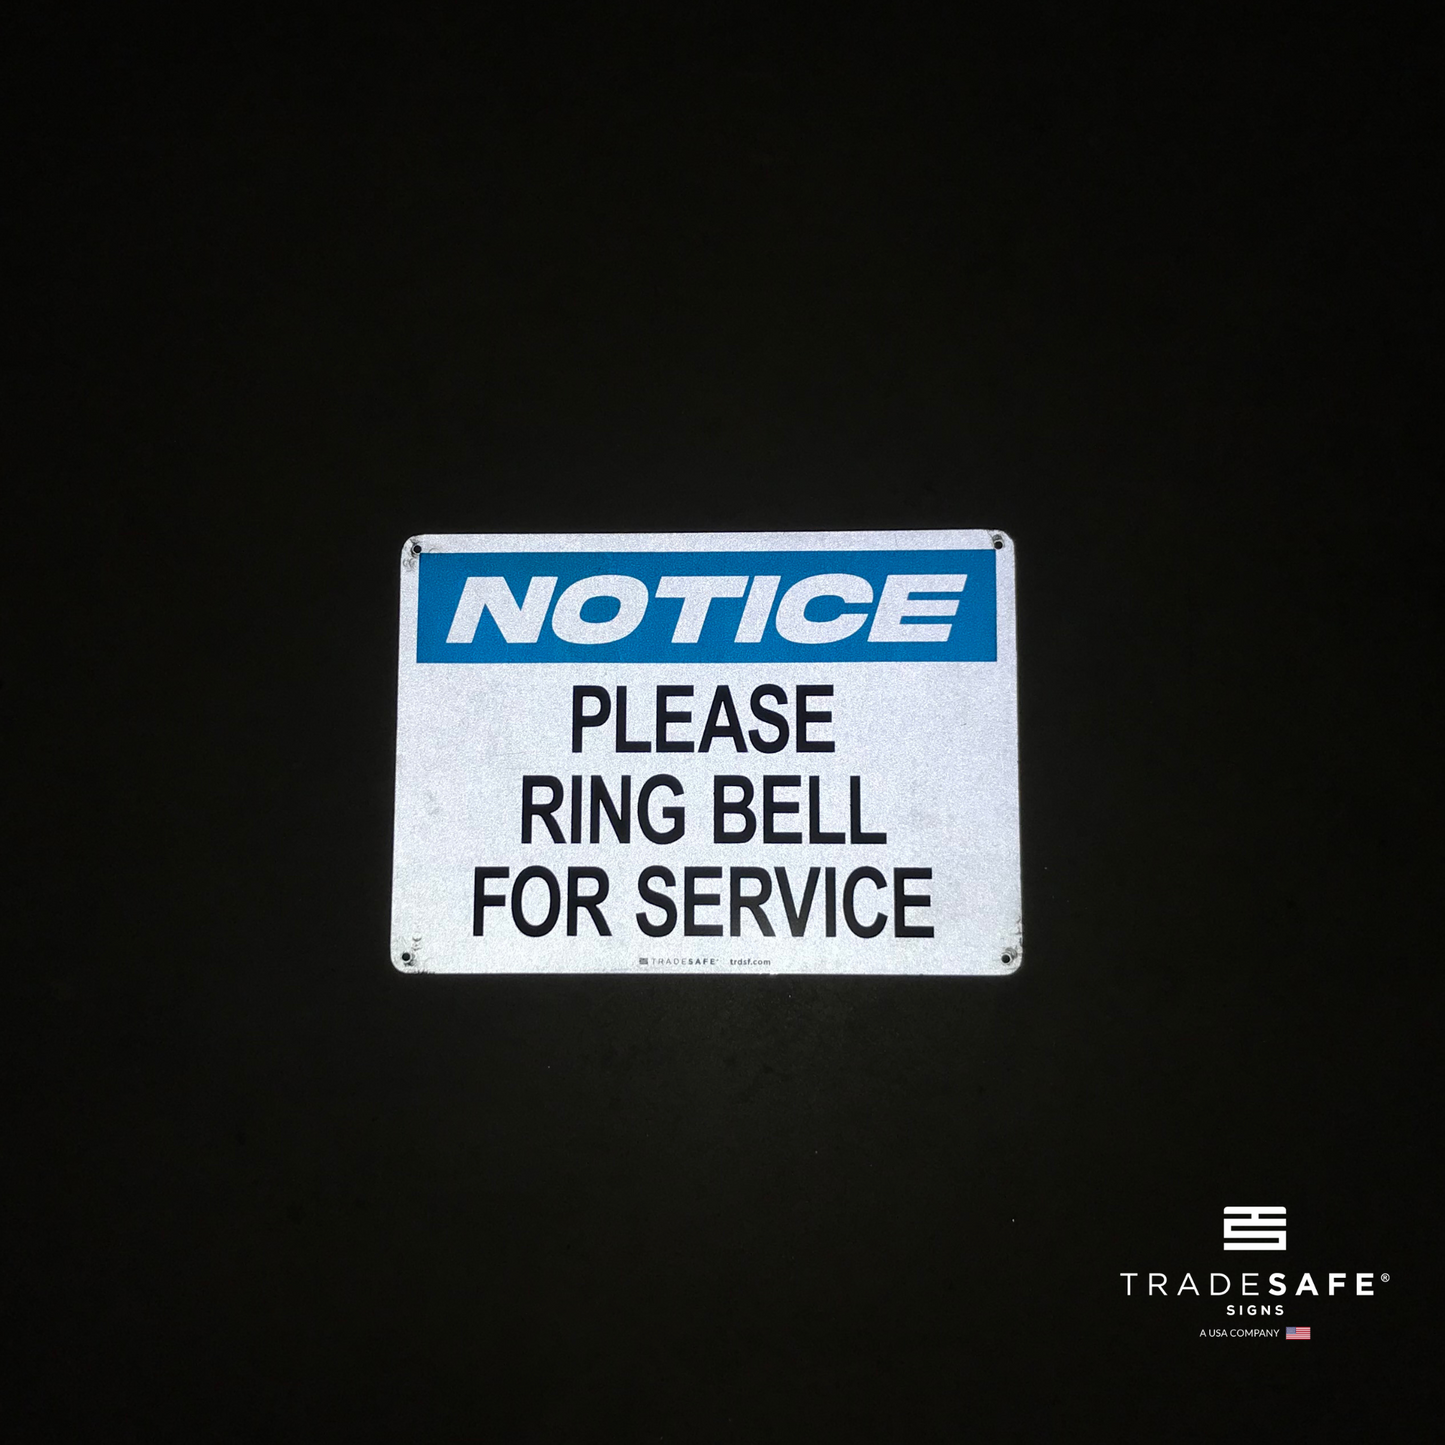 reflective attribute of ring bell for service sign on black background